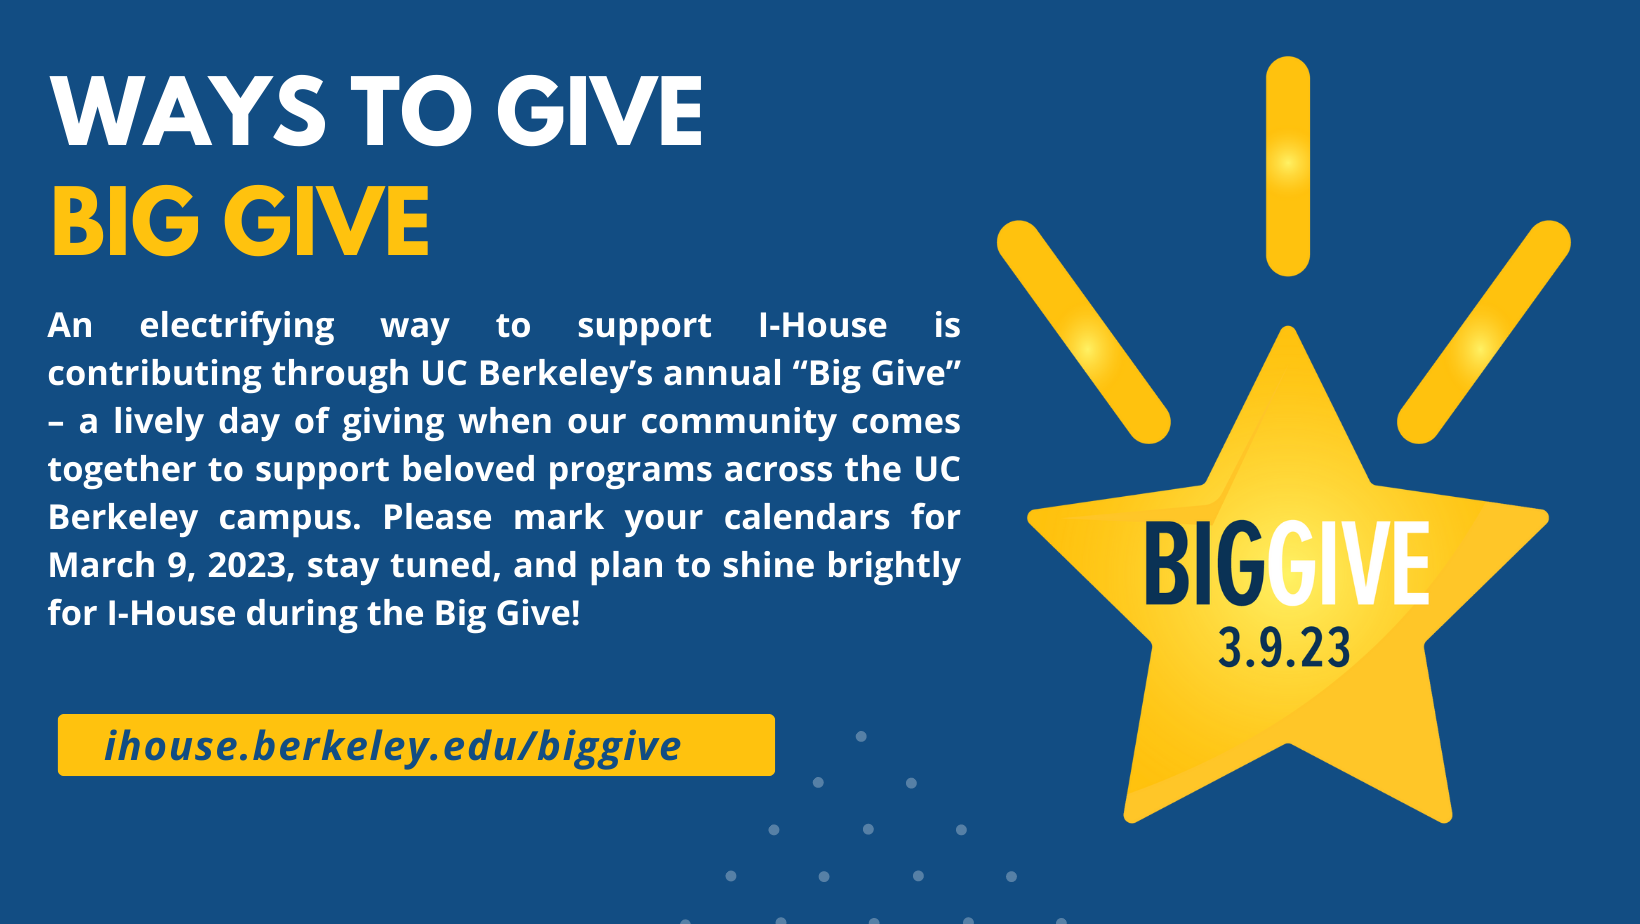 An electrifying way to support I-House is contributing through UC Berkeley’s annual “Big Give” – a lively day of giving when our community comes together to support beloved programs across the UC Berkeley campus. Visit ihouse.berkeley.edu/biggive